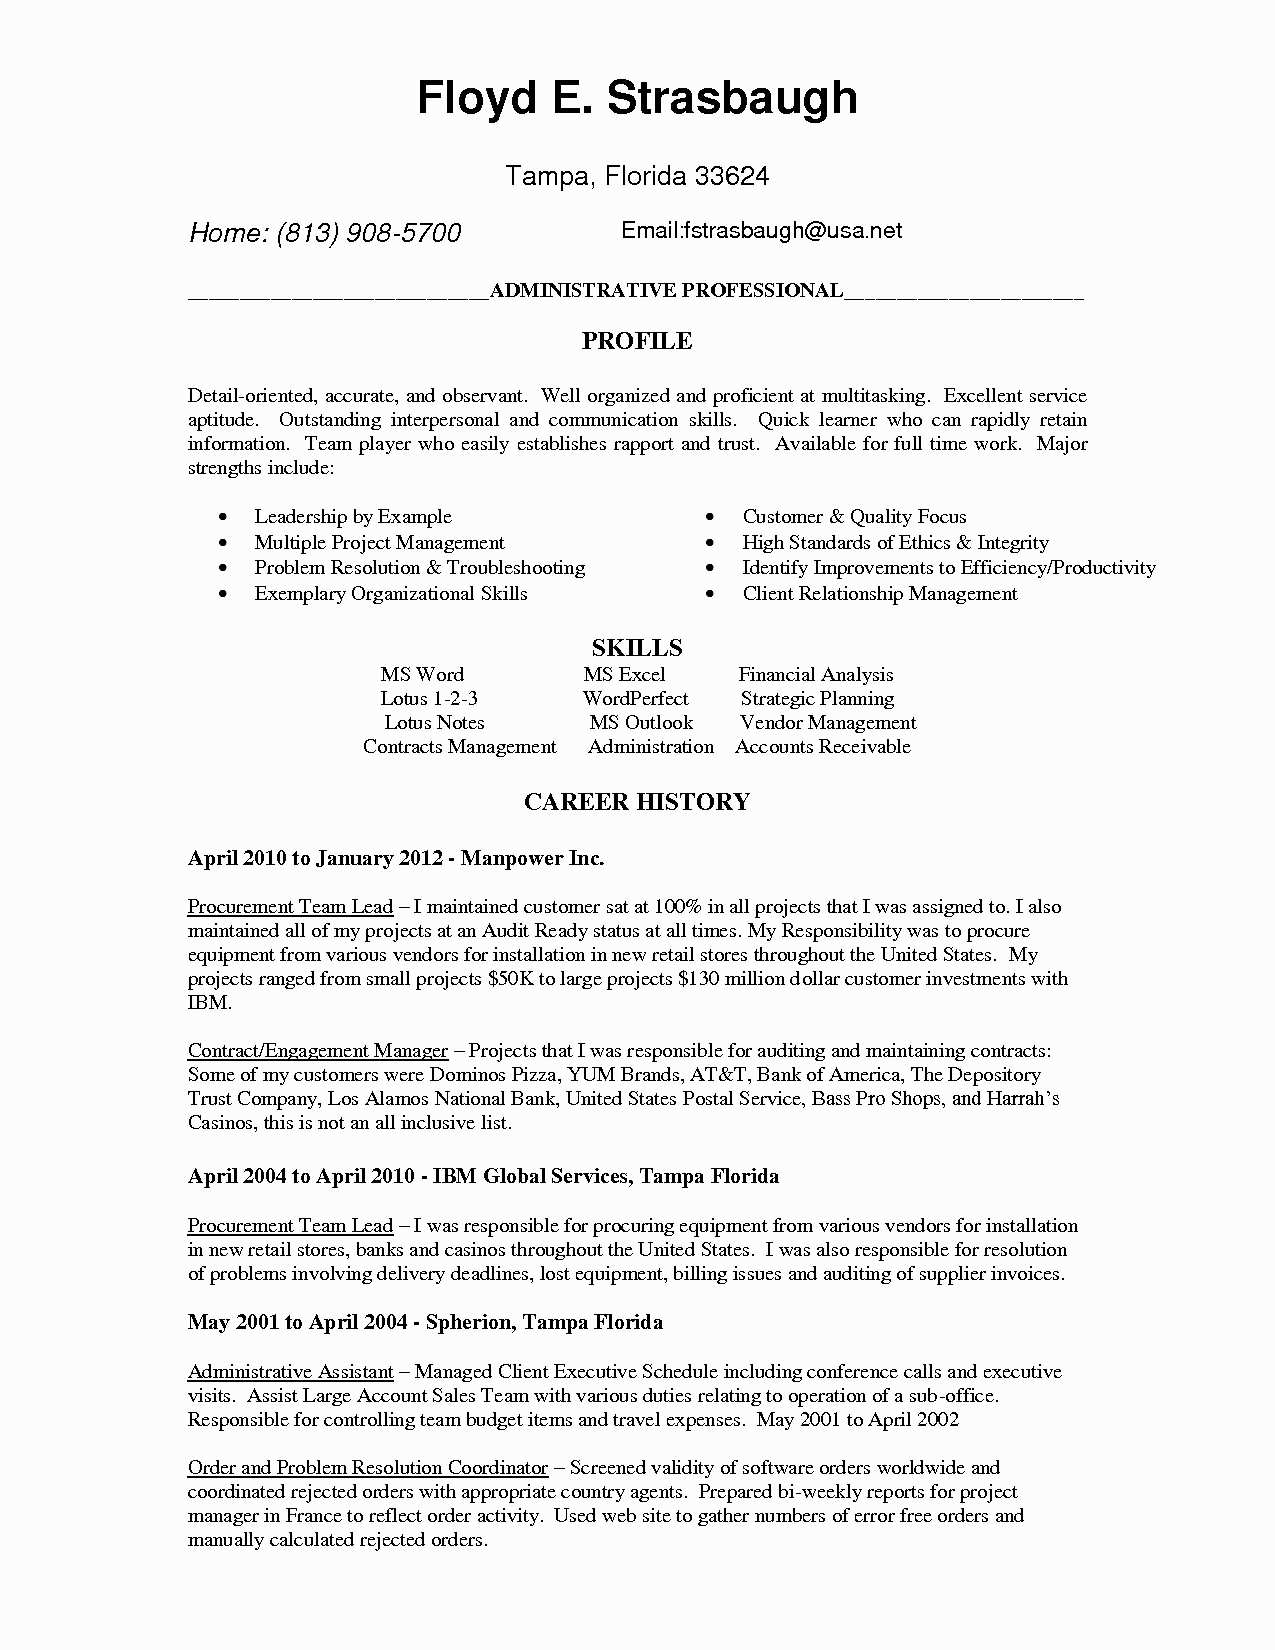 Customer Service Cover Letter Template - Letter Financial Support Template Beautiful English Letter